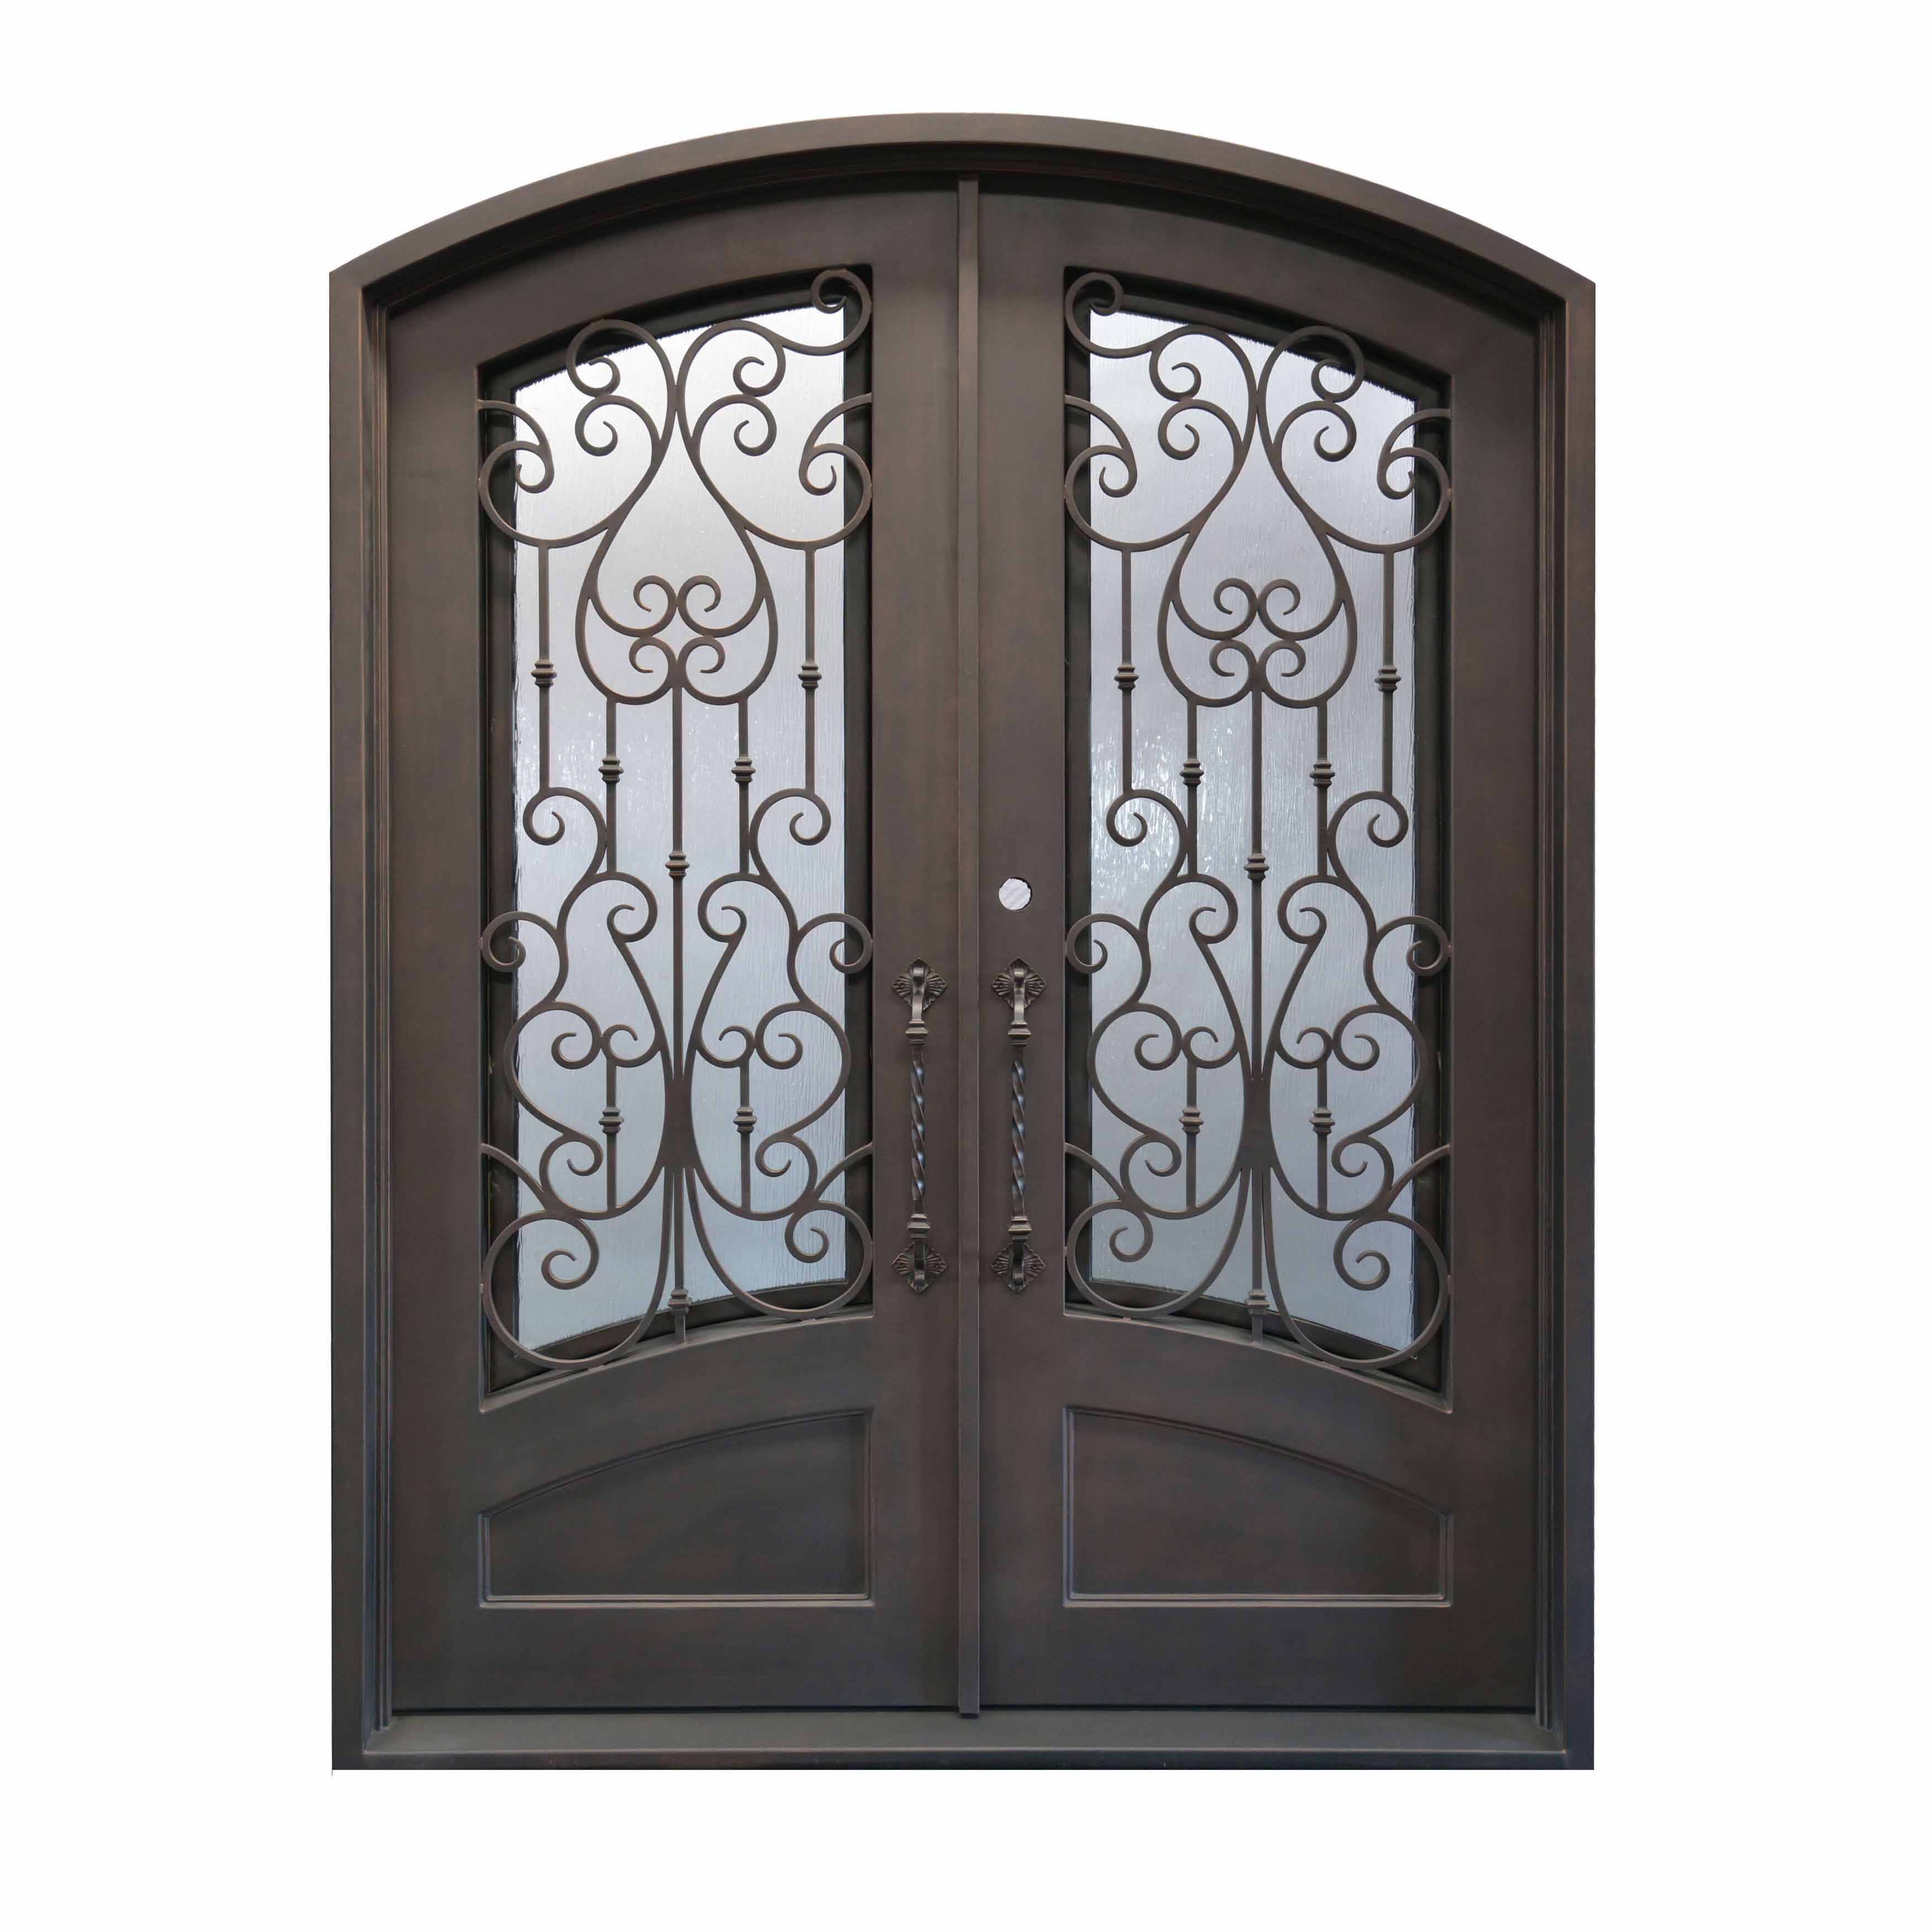 Customized wrought iron double door with eyebrow arched top